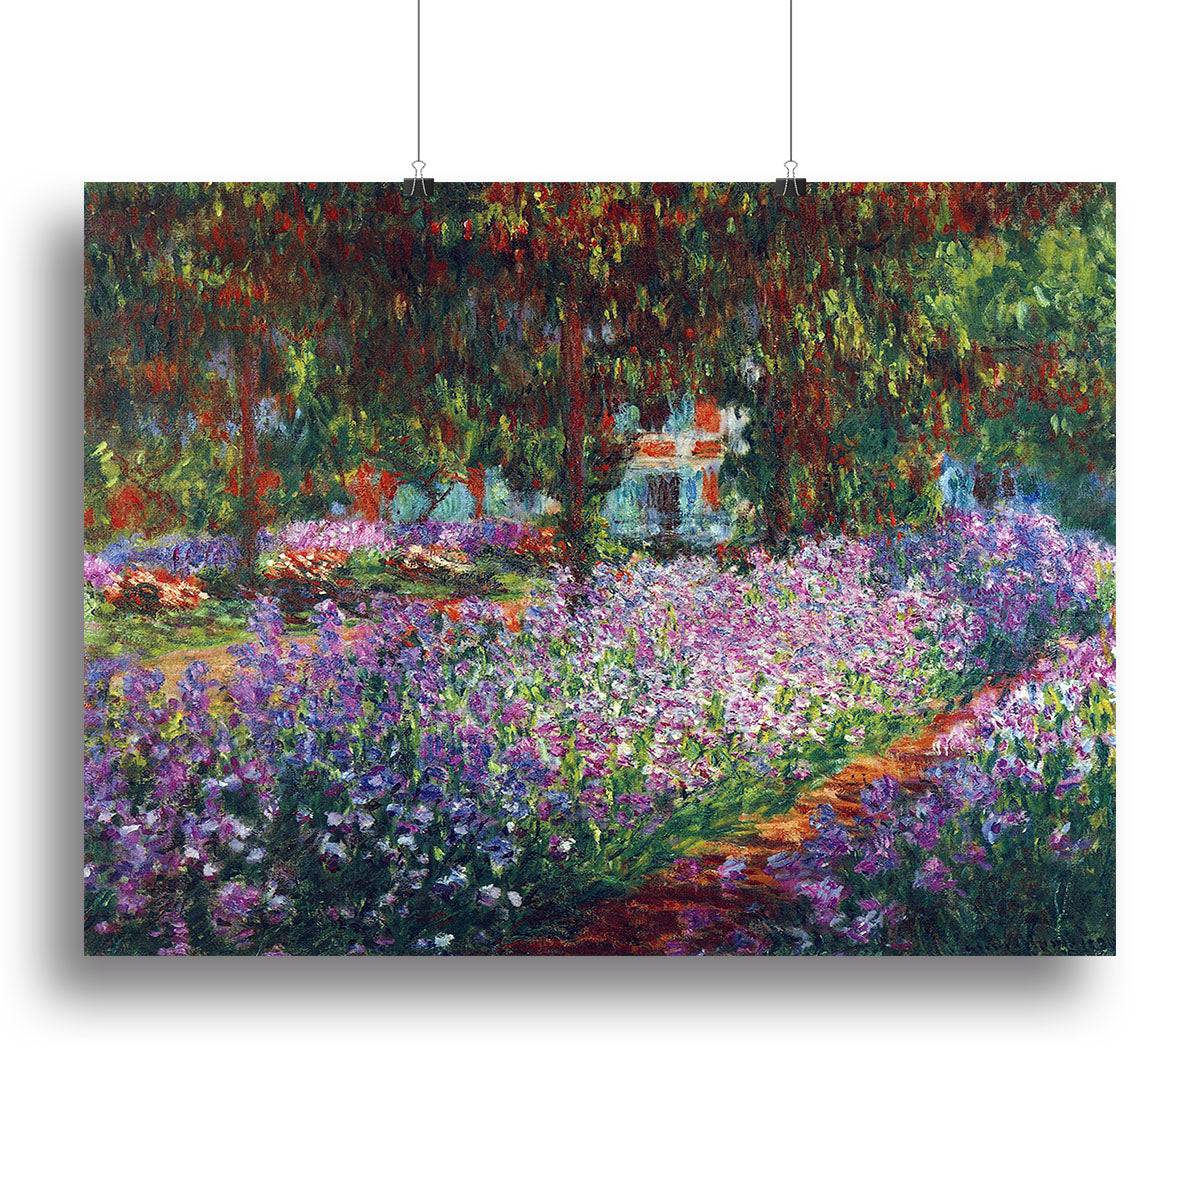 Monet's garden in Giverny by Monet Canvas Print or Poster - Canvas Art Rocks - 2